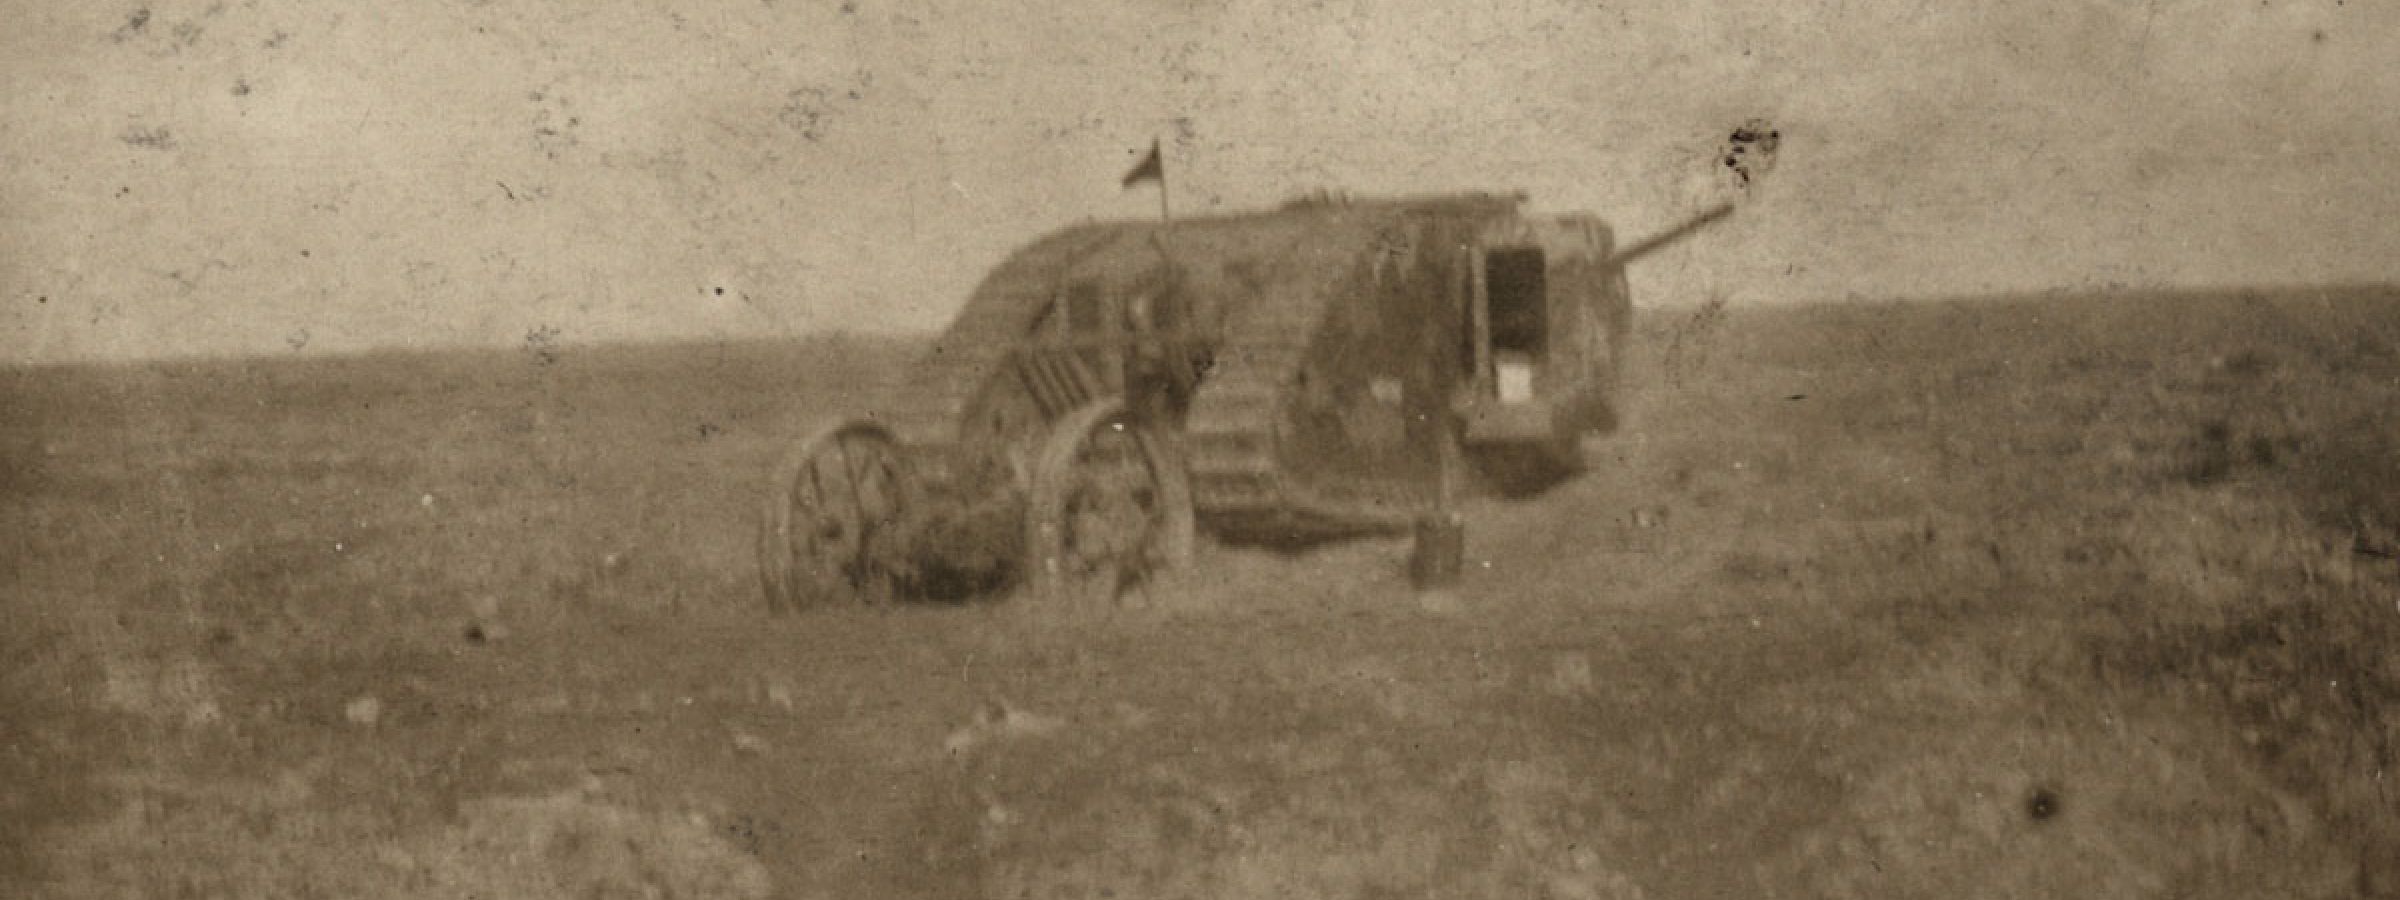 The Mark I, one of first tanks used in battle at the Somme, 1916.